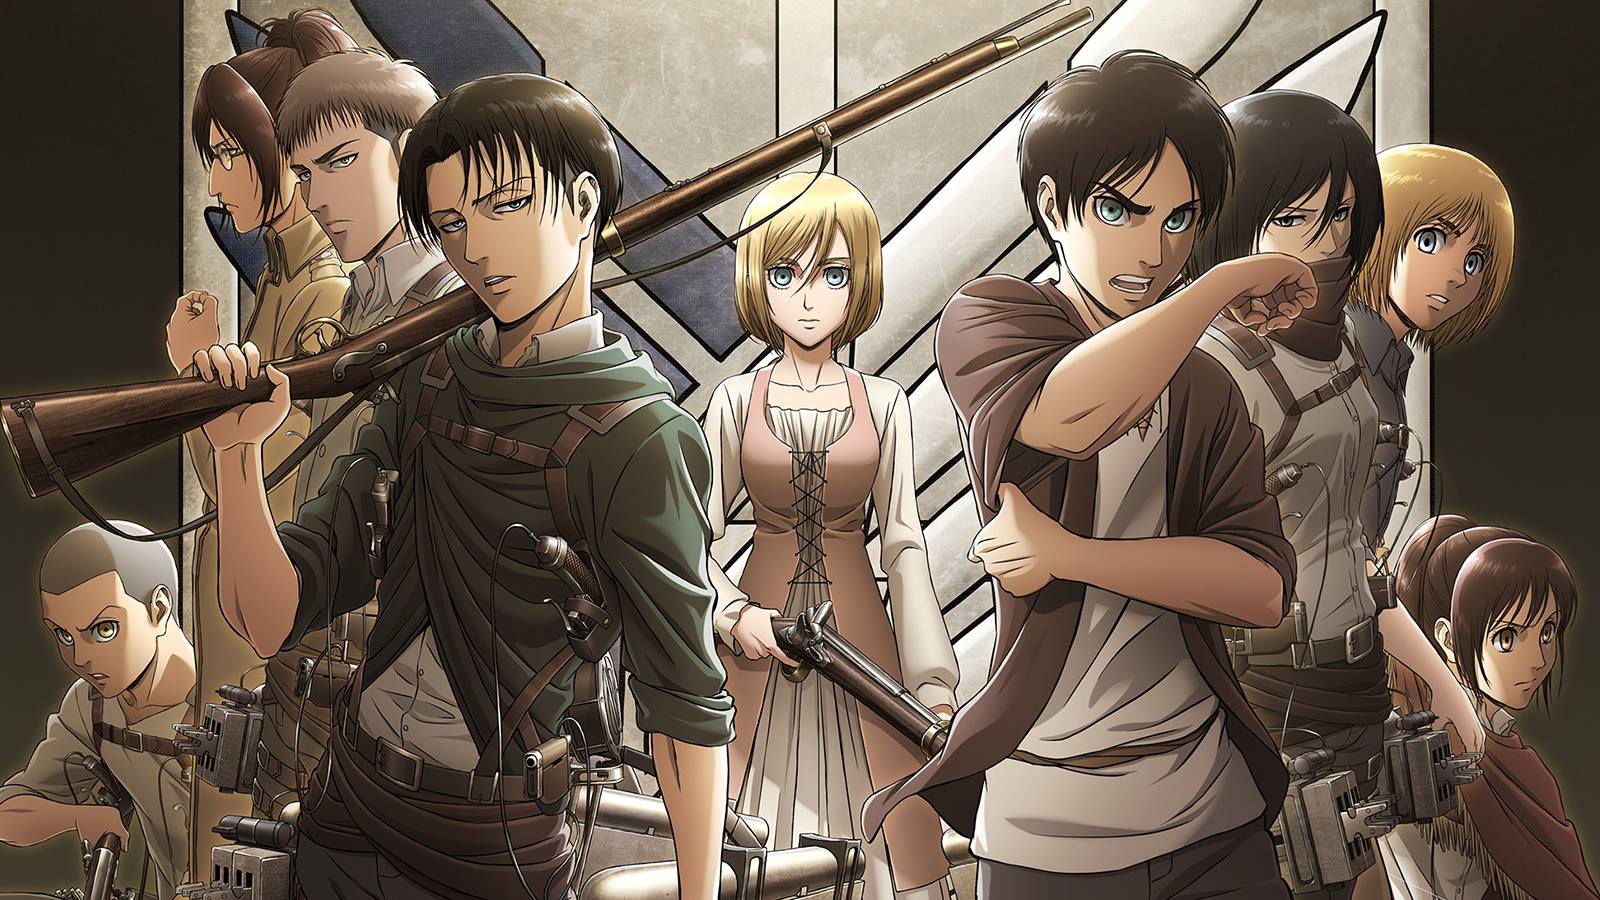 Aesthetic Attack On Titan Wallpapers - Wallpaper Cave